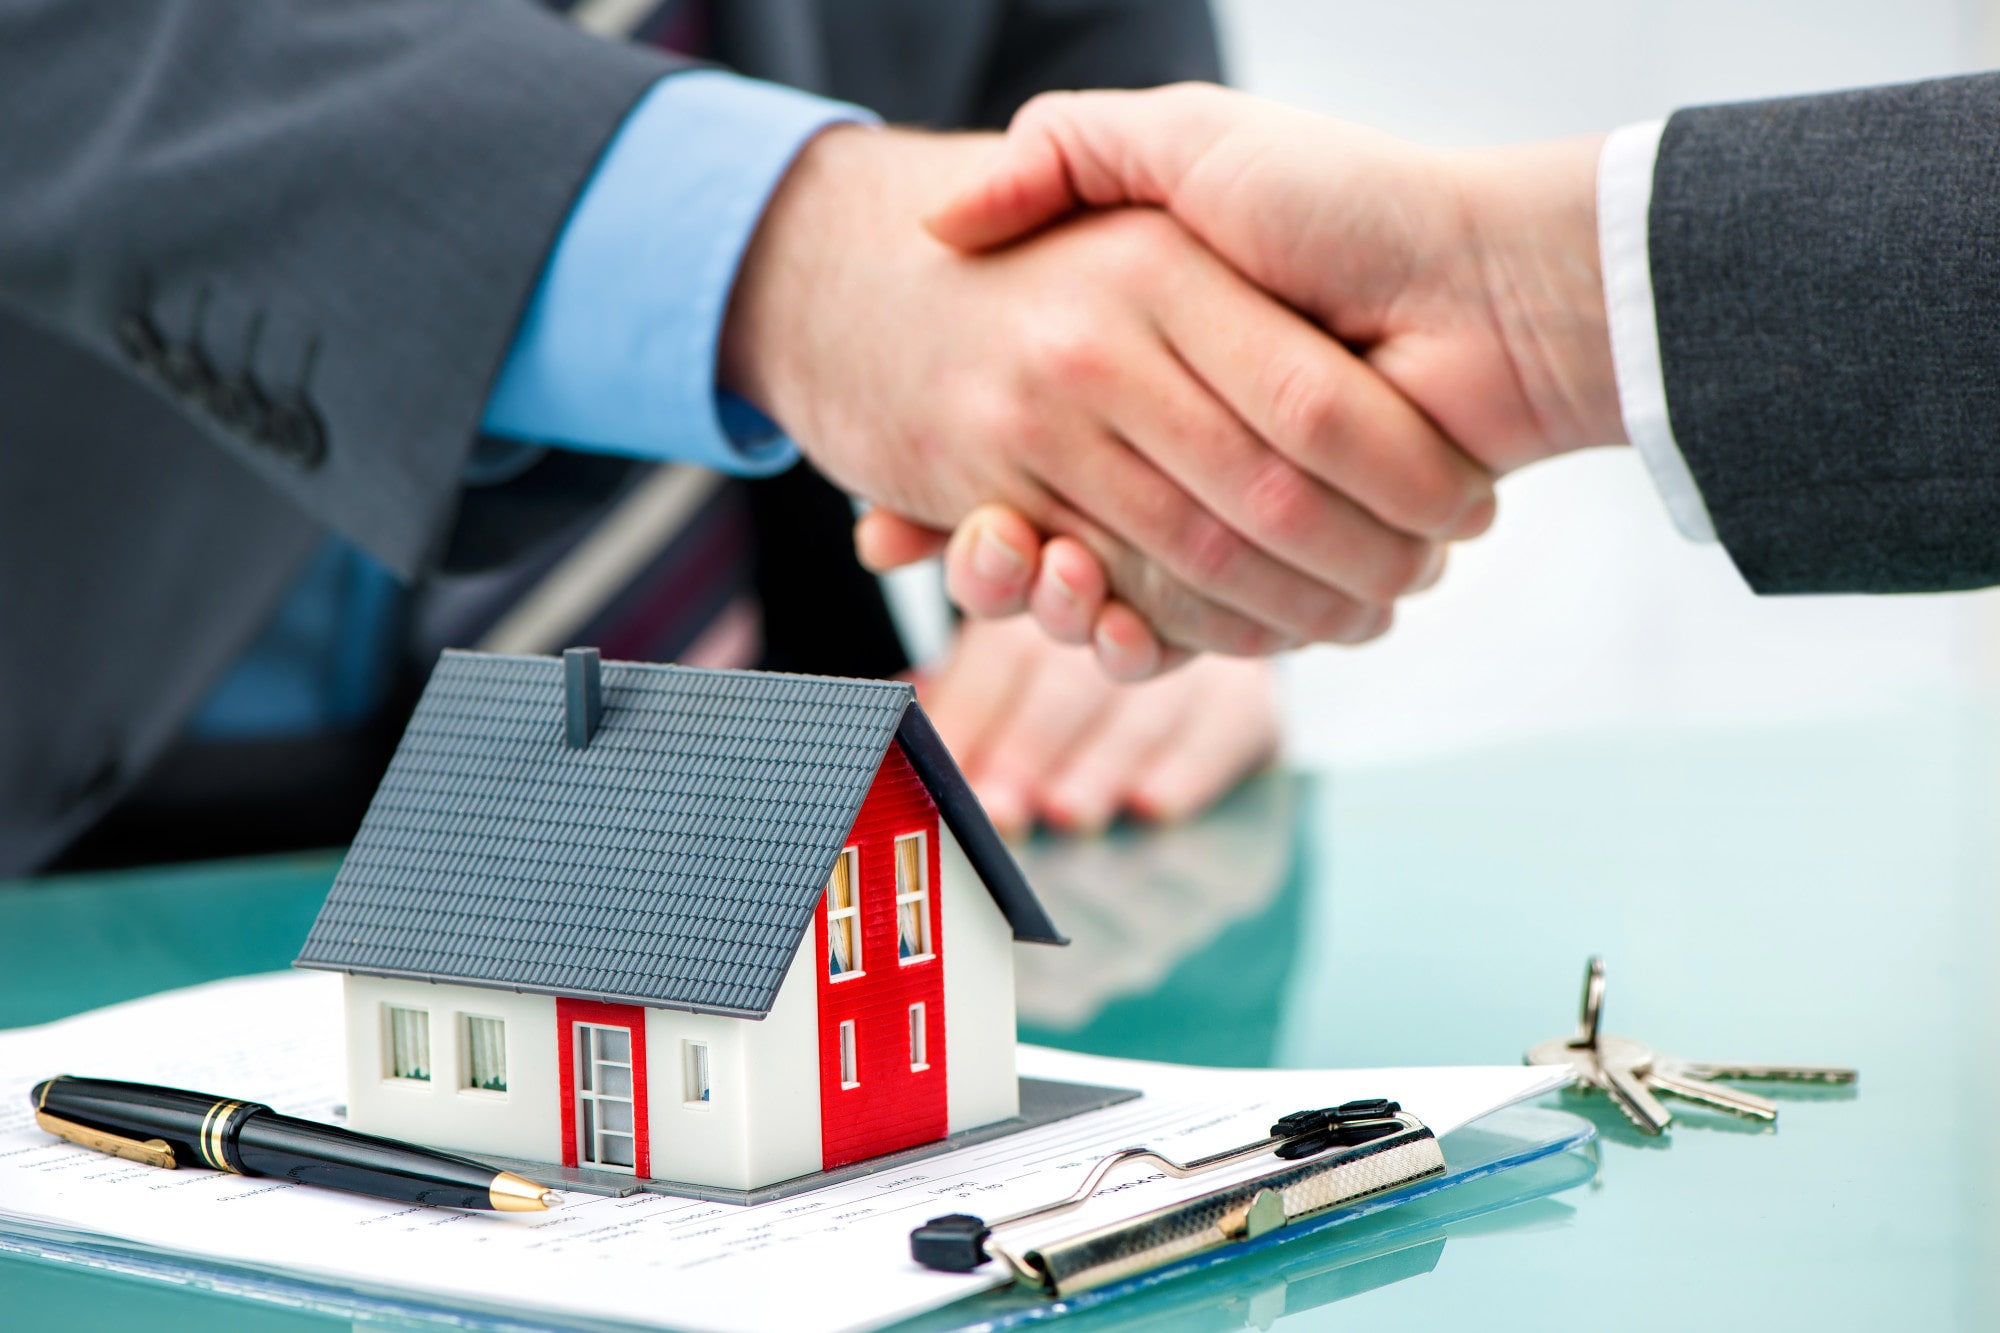 The Top Landlord Tips From Other Denver Property Managers